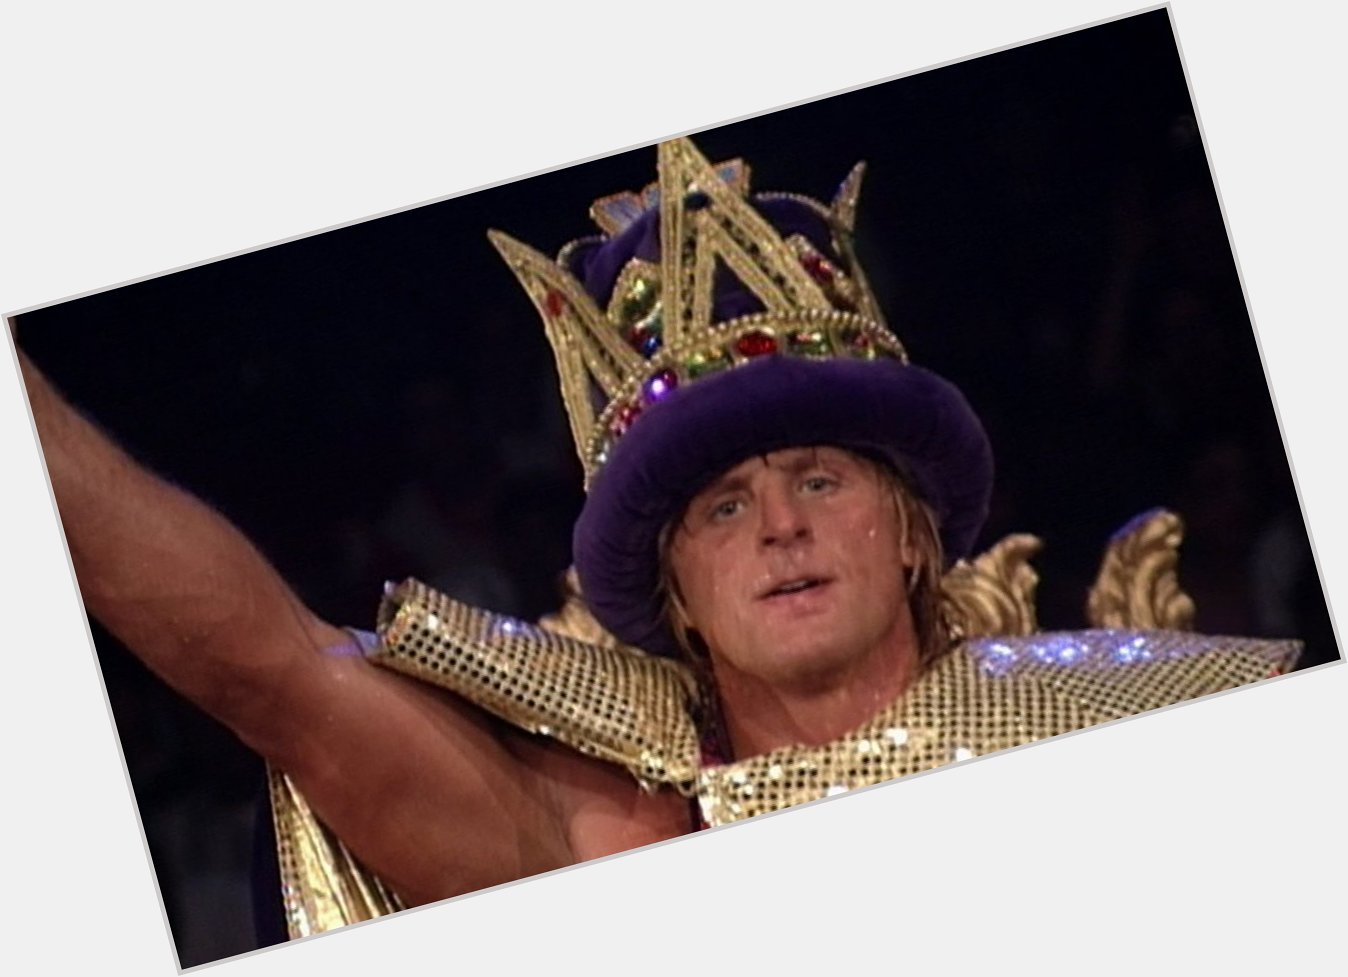 Today would have been the 52nd birthday of Owen Hart.

Happy birthday and RIP you absolute legend! 